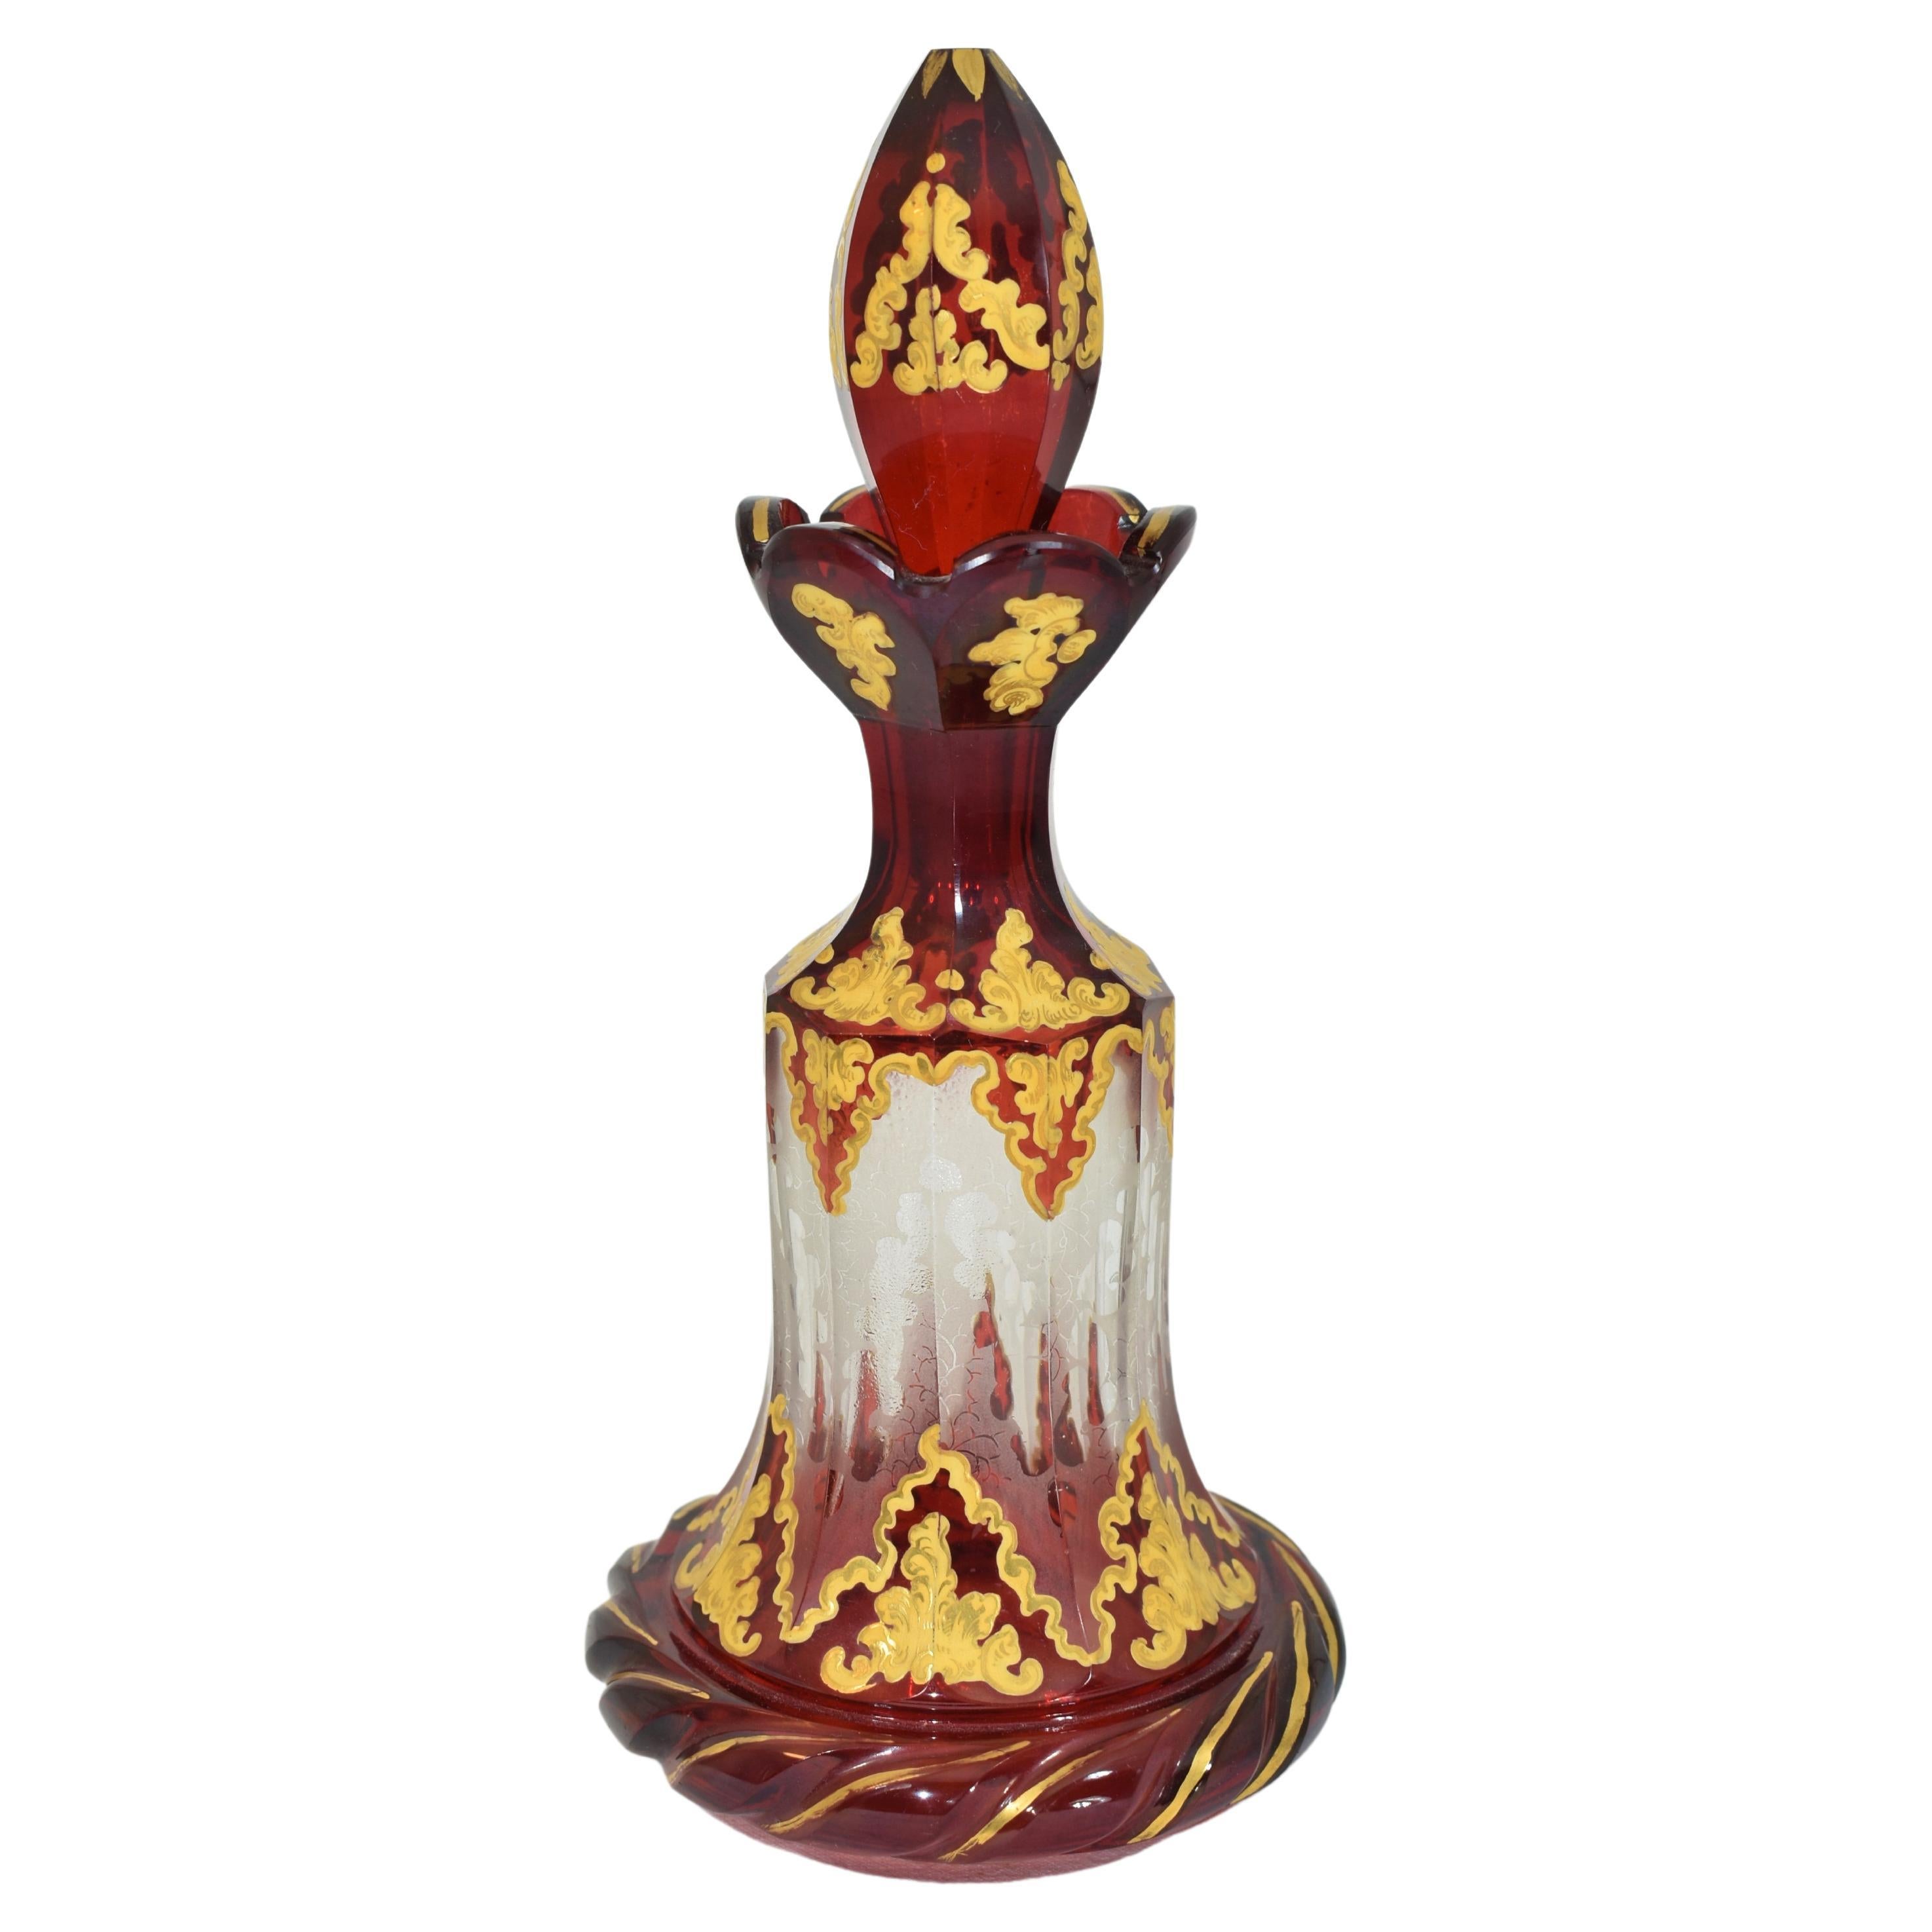 Bohemian crystal, deep ruby cut glass perfume bottle and stopper.
decorated with impressive gilded enamelled decoration.
Bohemia, 19th century.